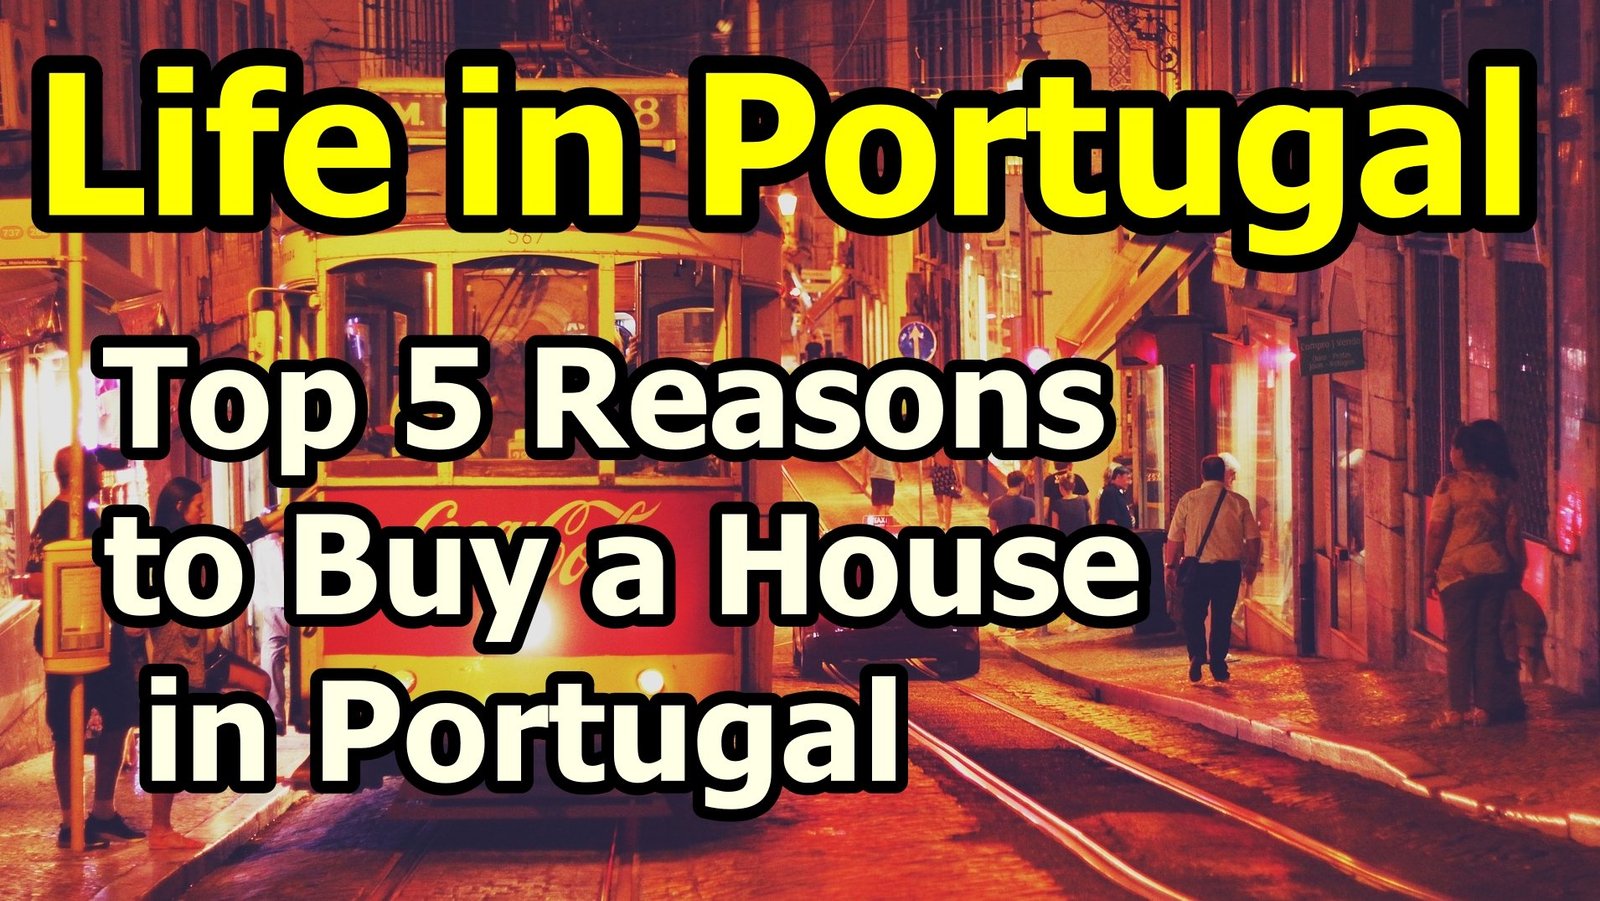 Life in Portugal